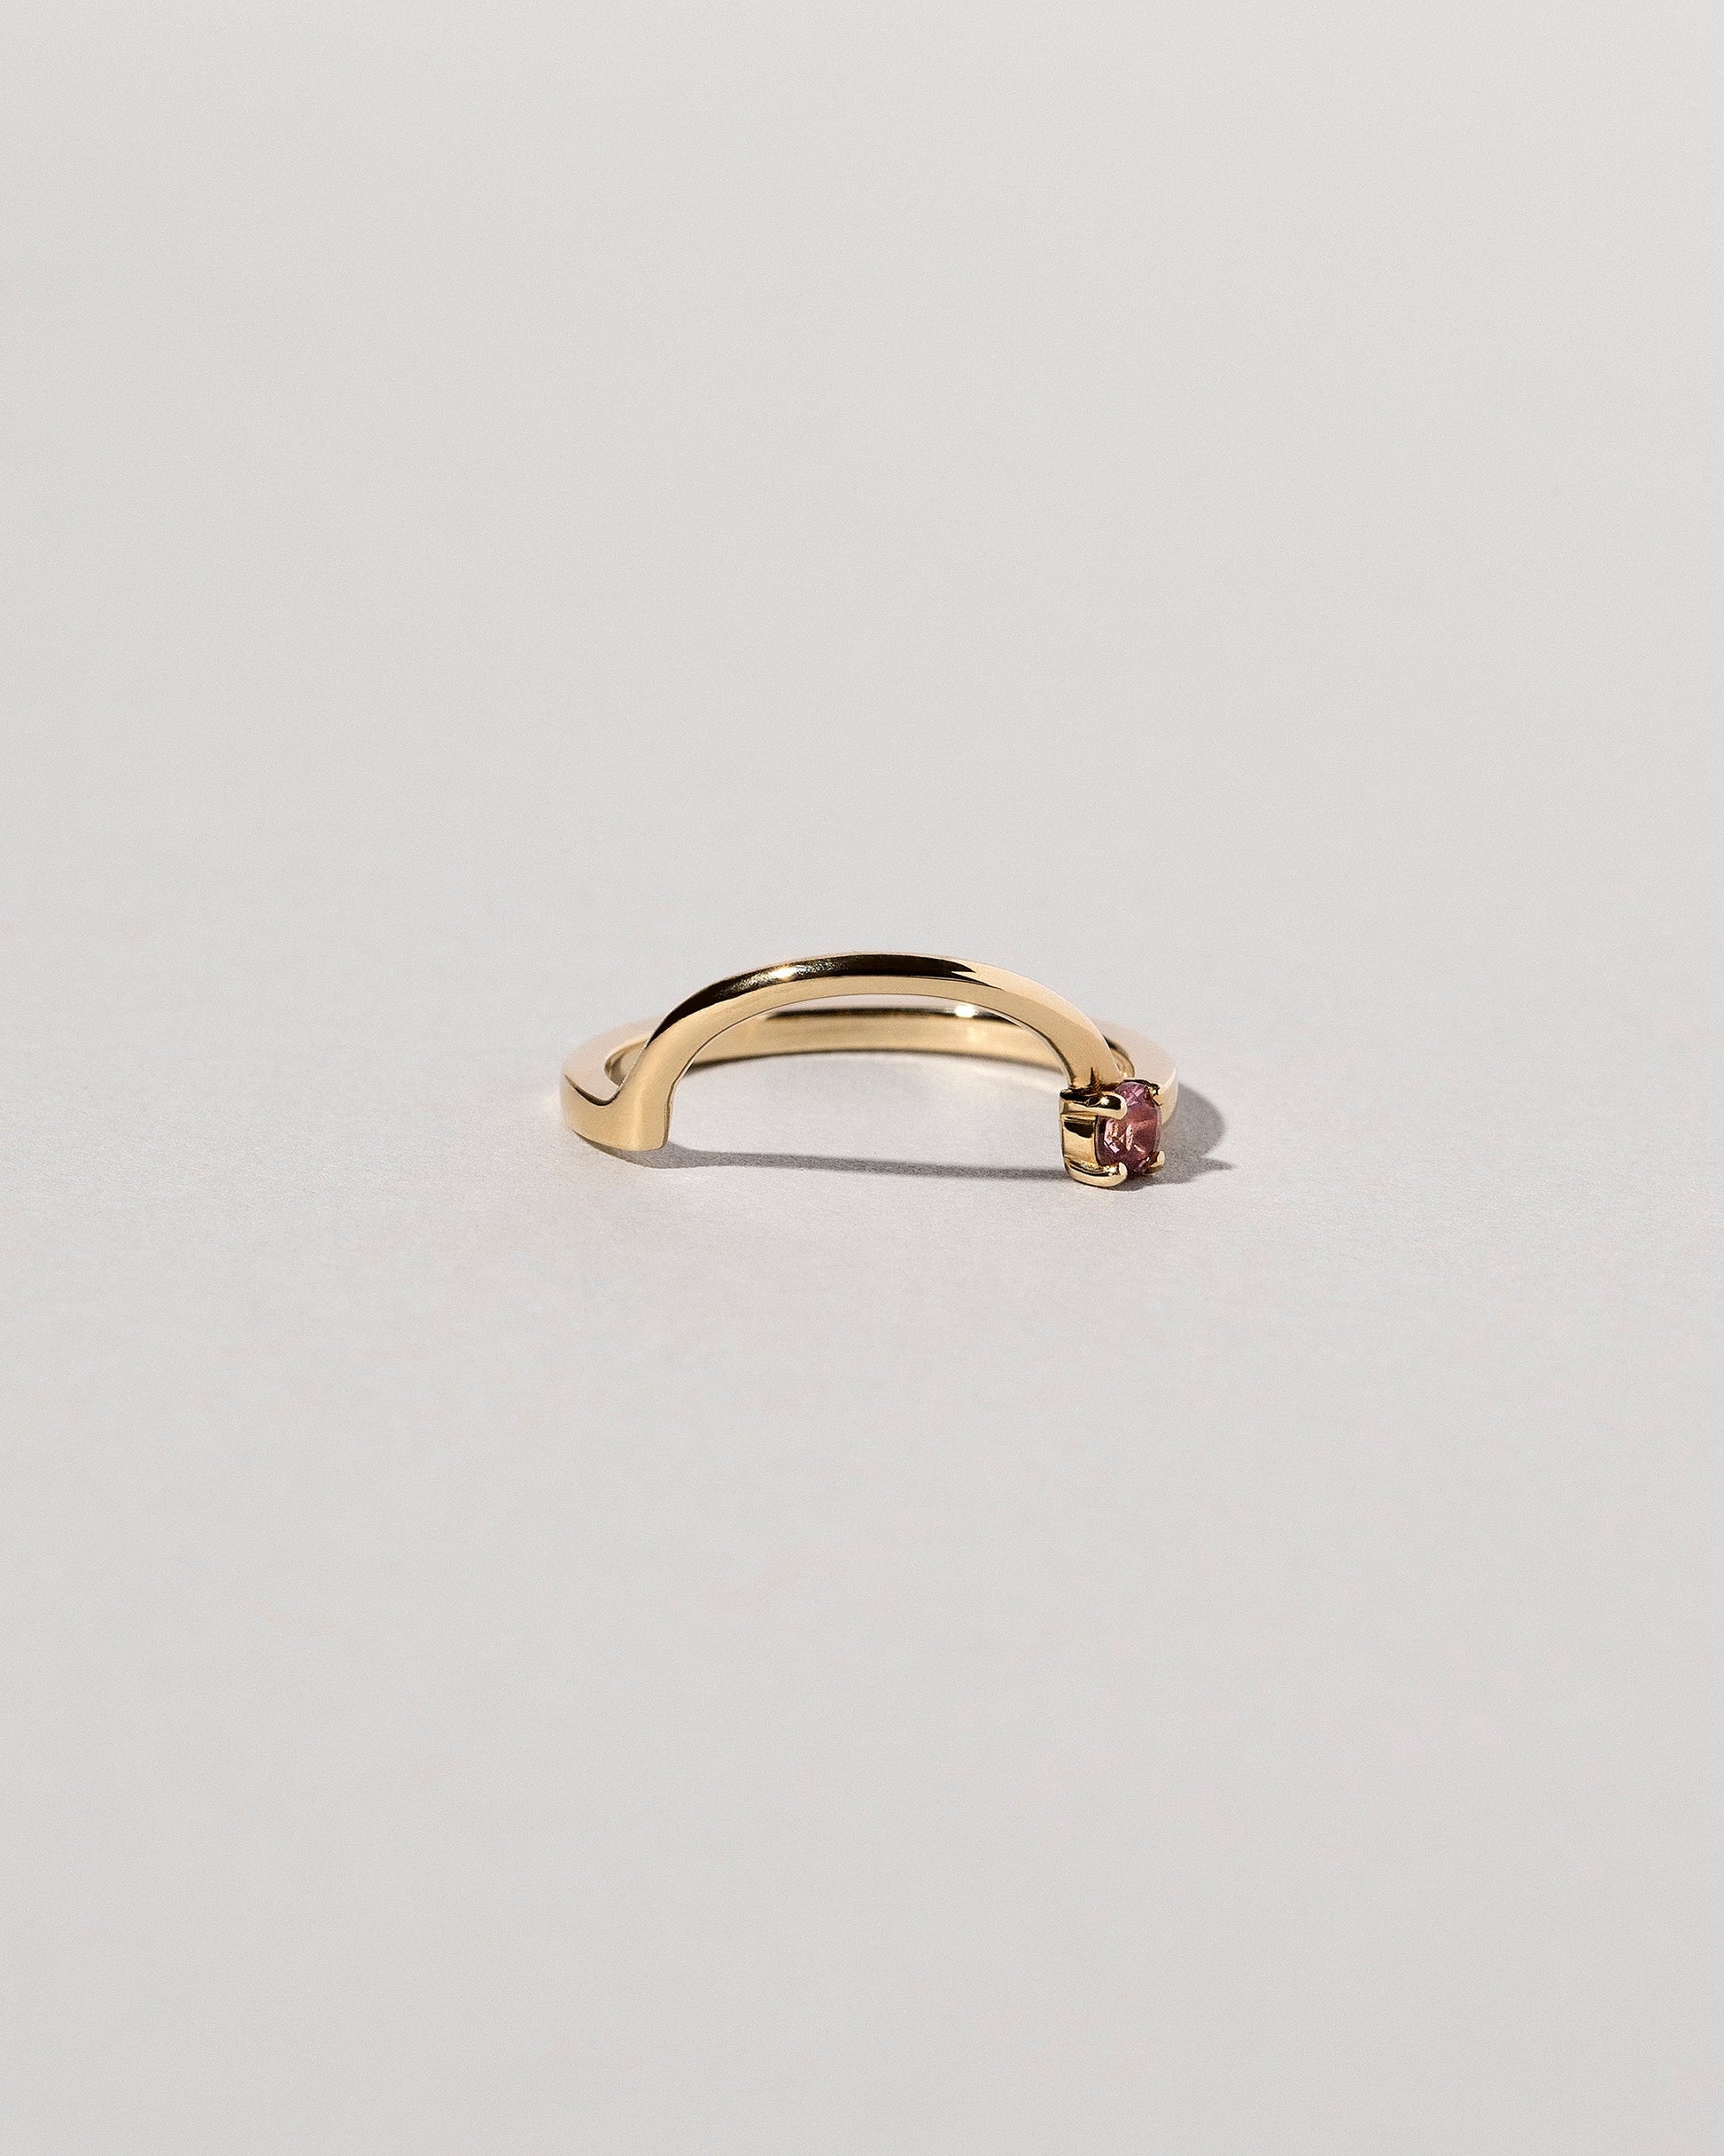 Yellow Gold Spinel Half Hoop Band on light color background.